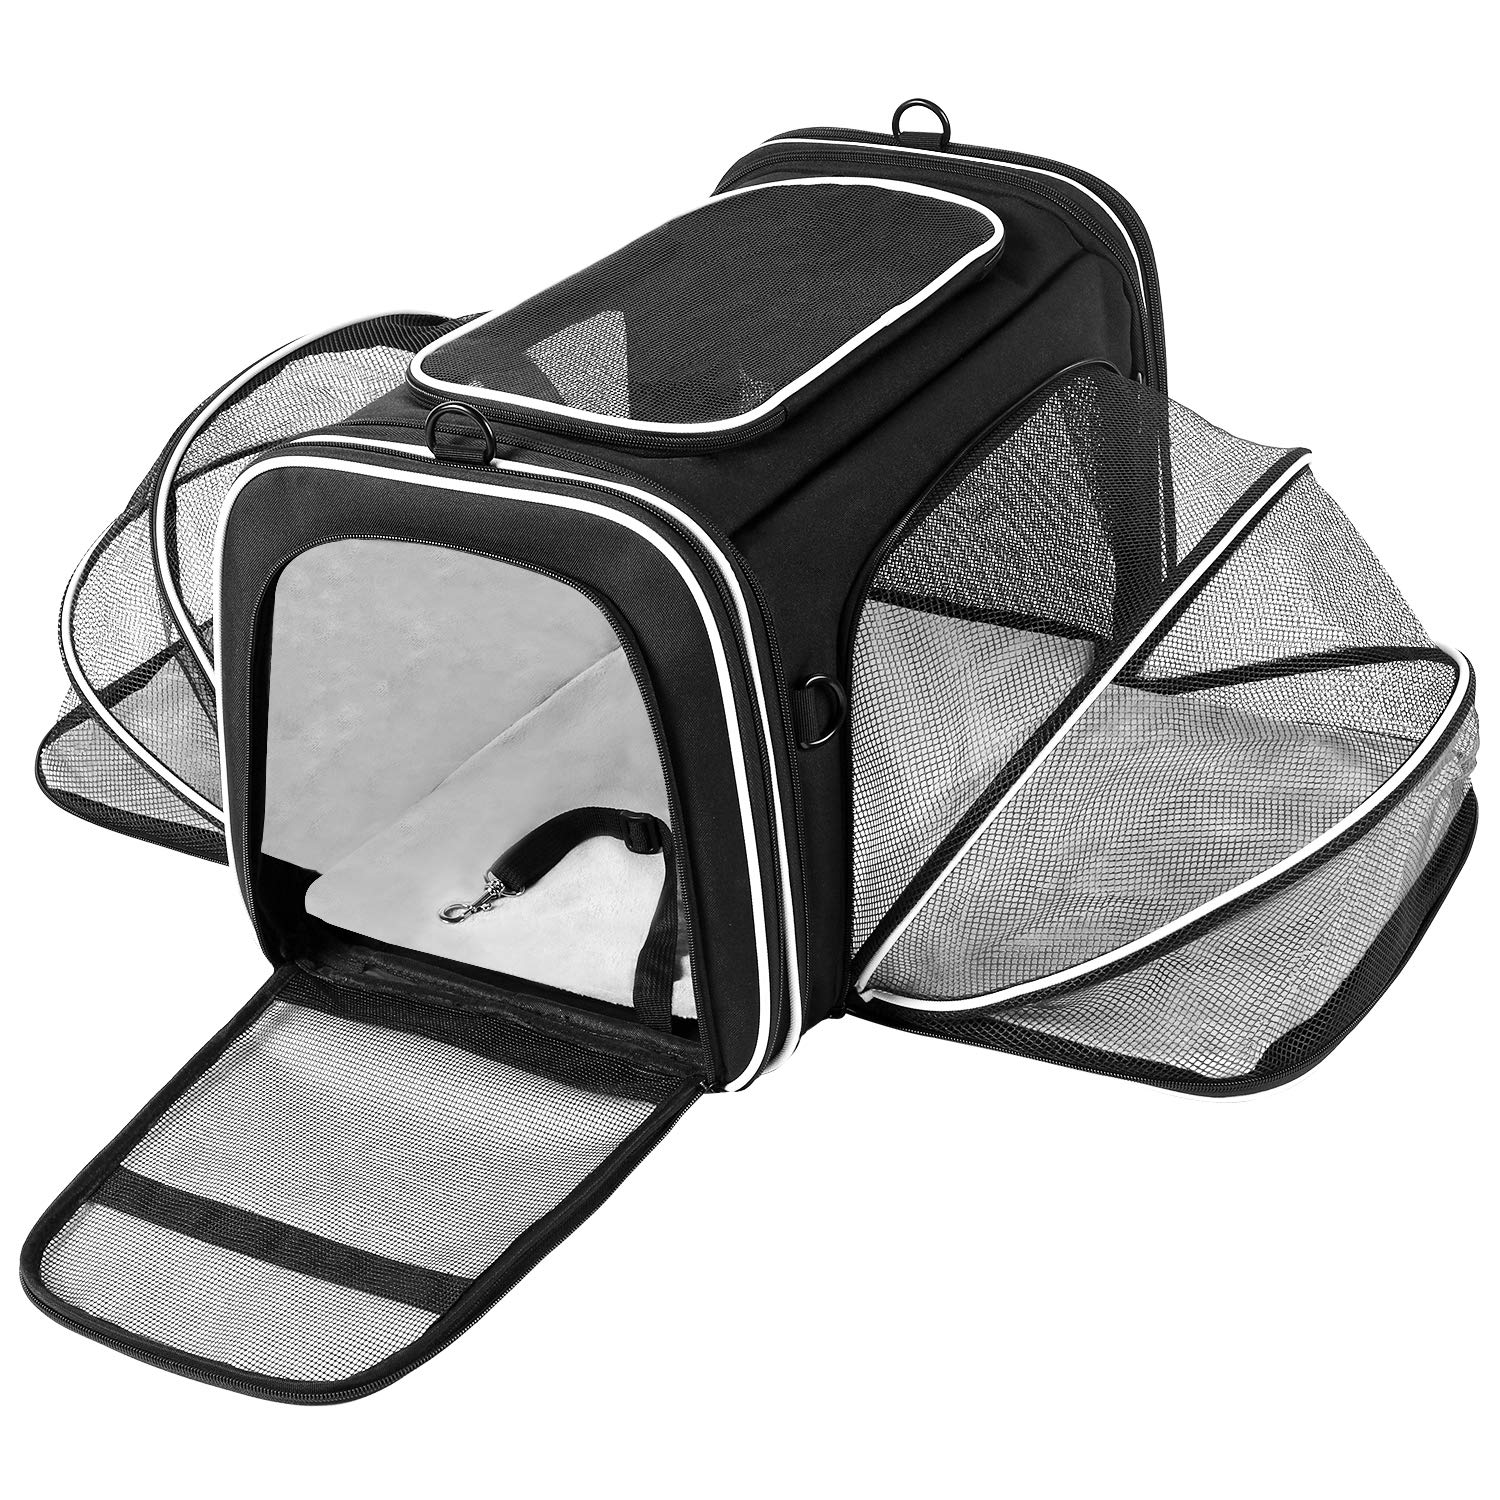 MASKEYON TSA Airline Approved Large Pet Travel carrier,4 Sides Expandable with 2 Mesh Pockets,3 Entry,Washable Pads,Shoulder Str